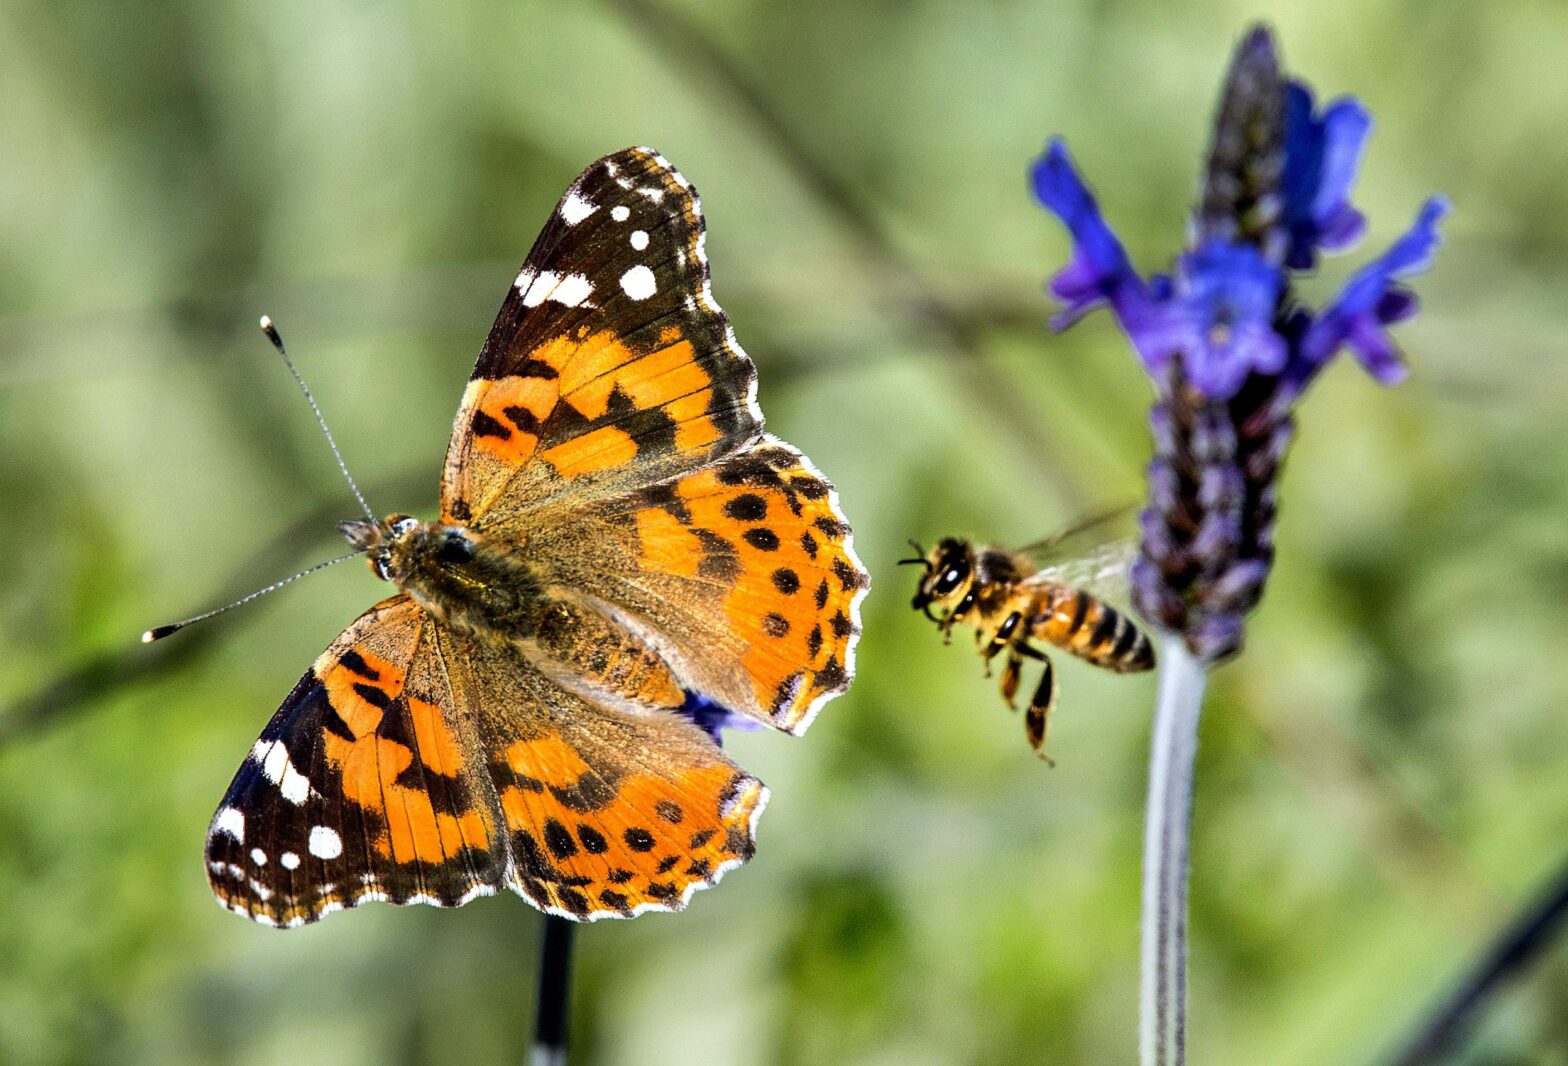 Swarms of butterflies migrate through Southern California